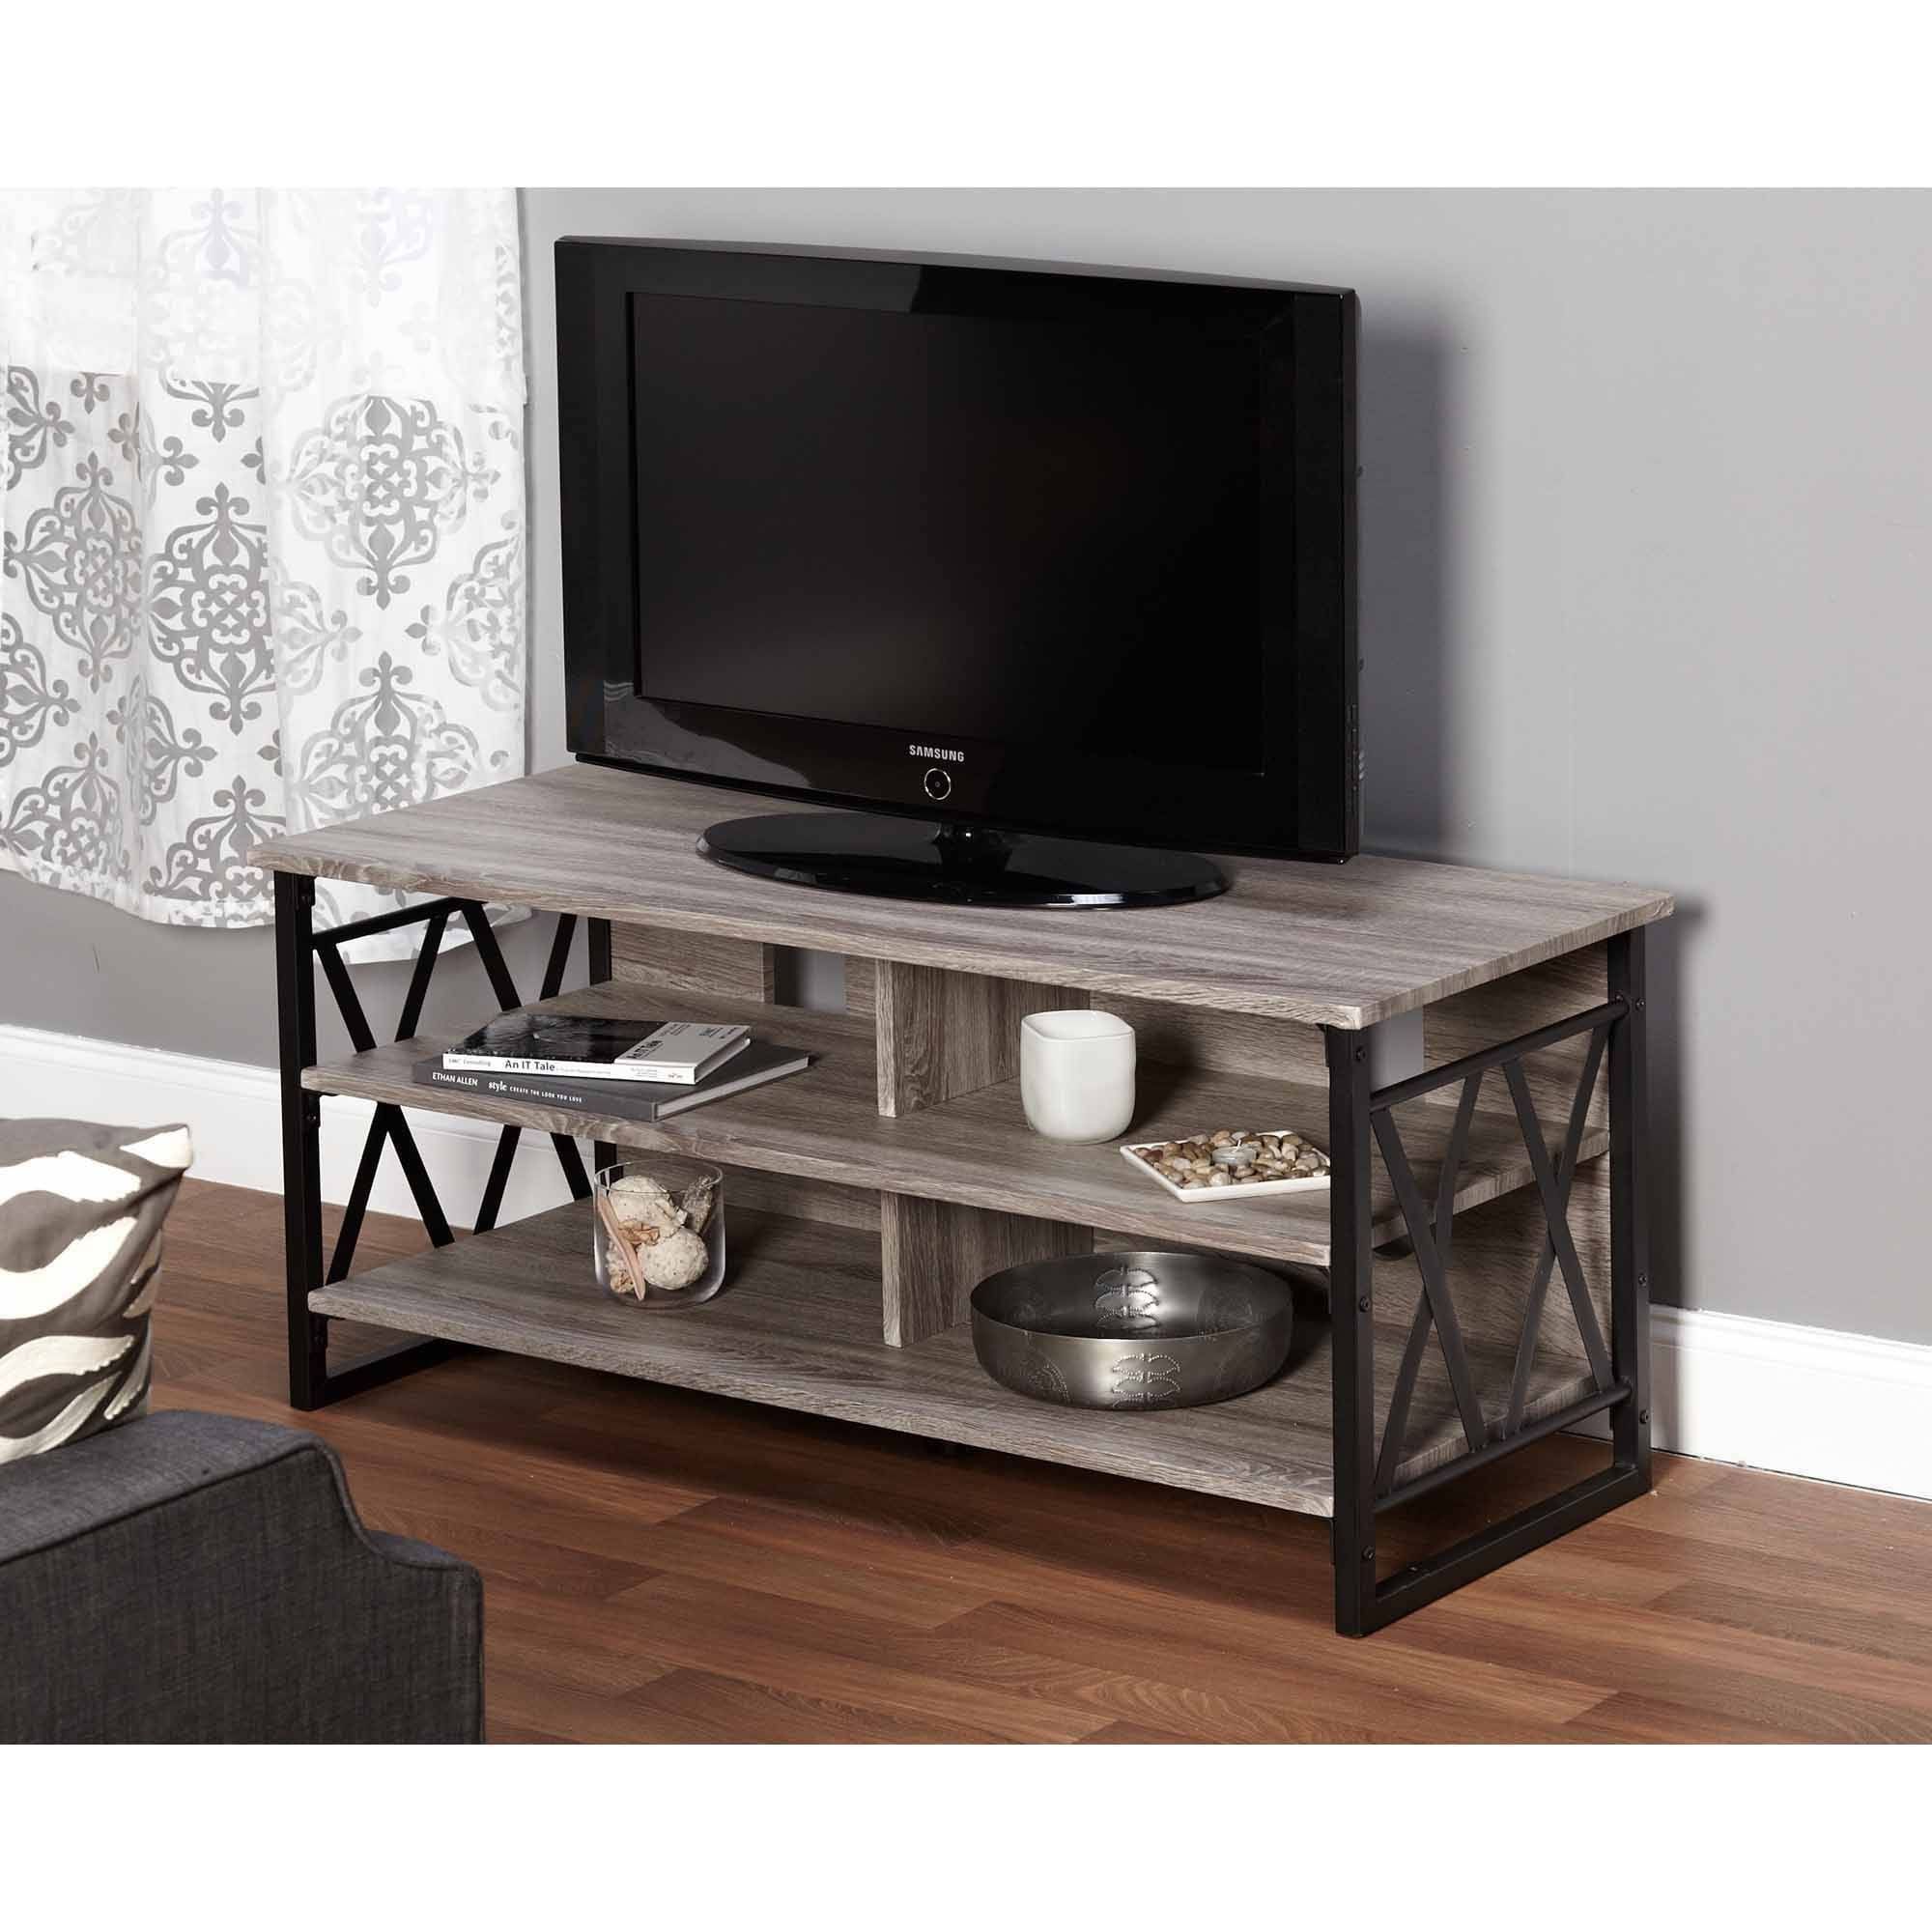 Charming Light Wood Tv Stand 75 For Your Home Decorating Ideas Intended For Rustic Looking Tv Stands (View 14 of 15)